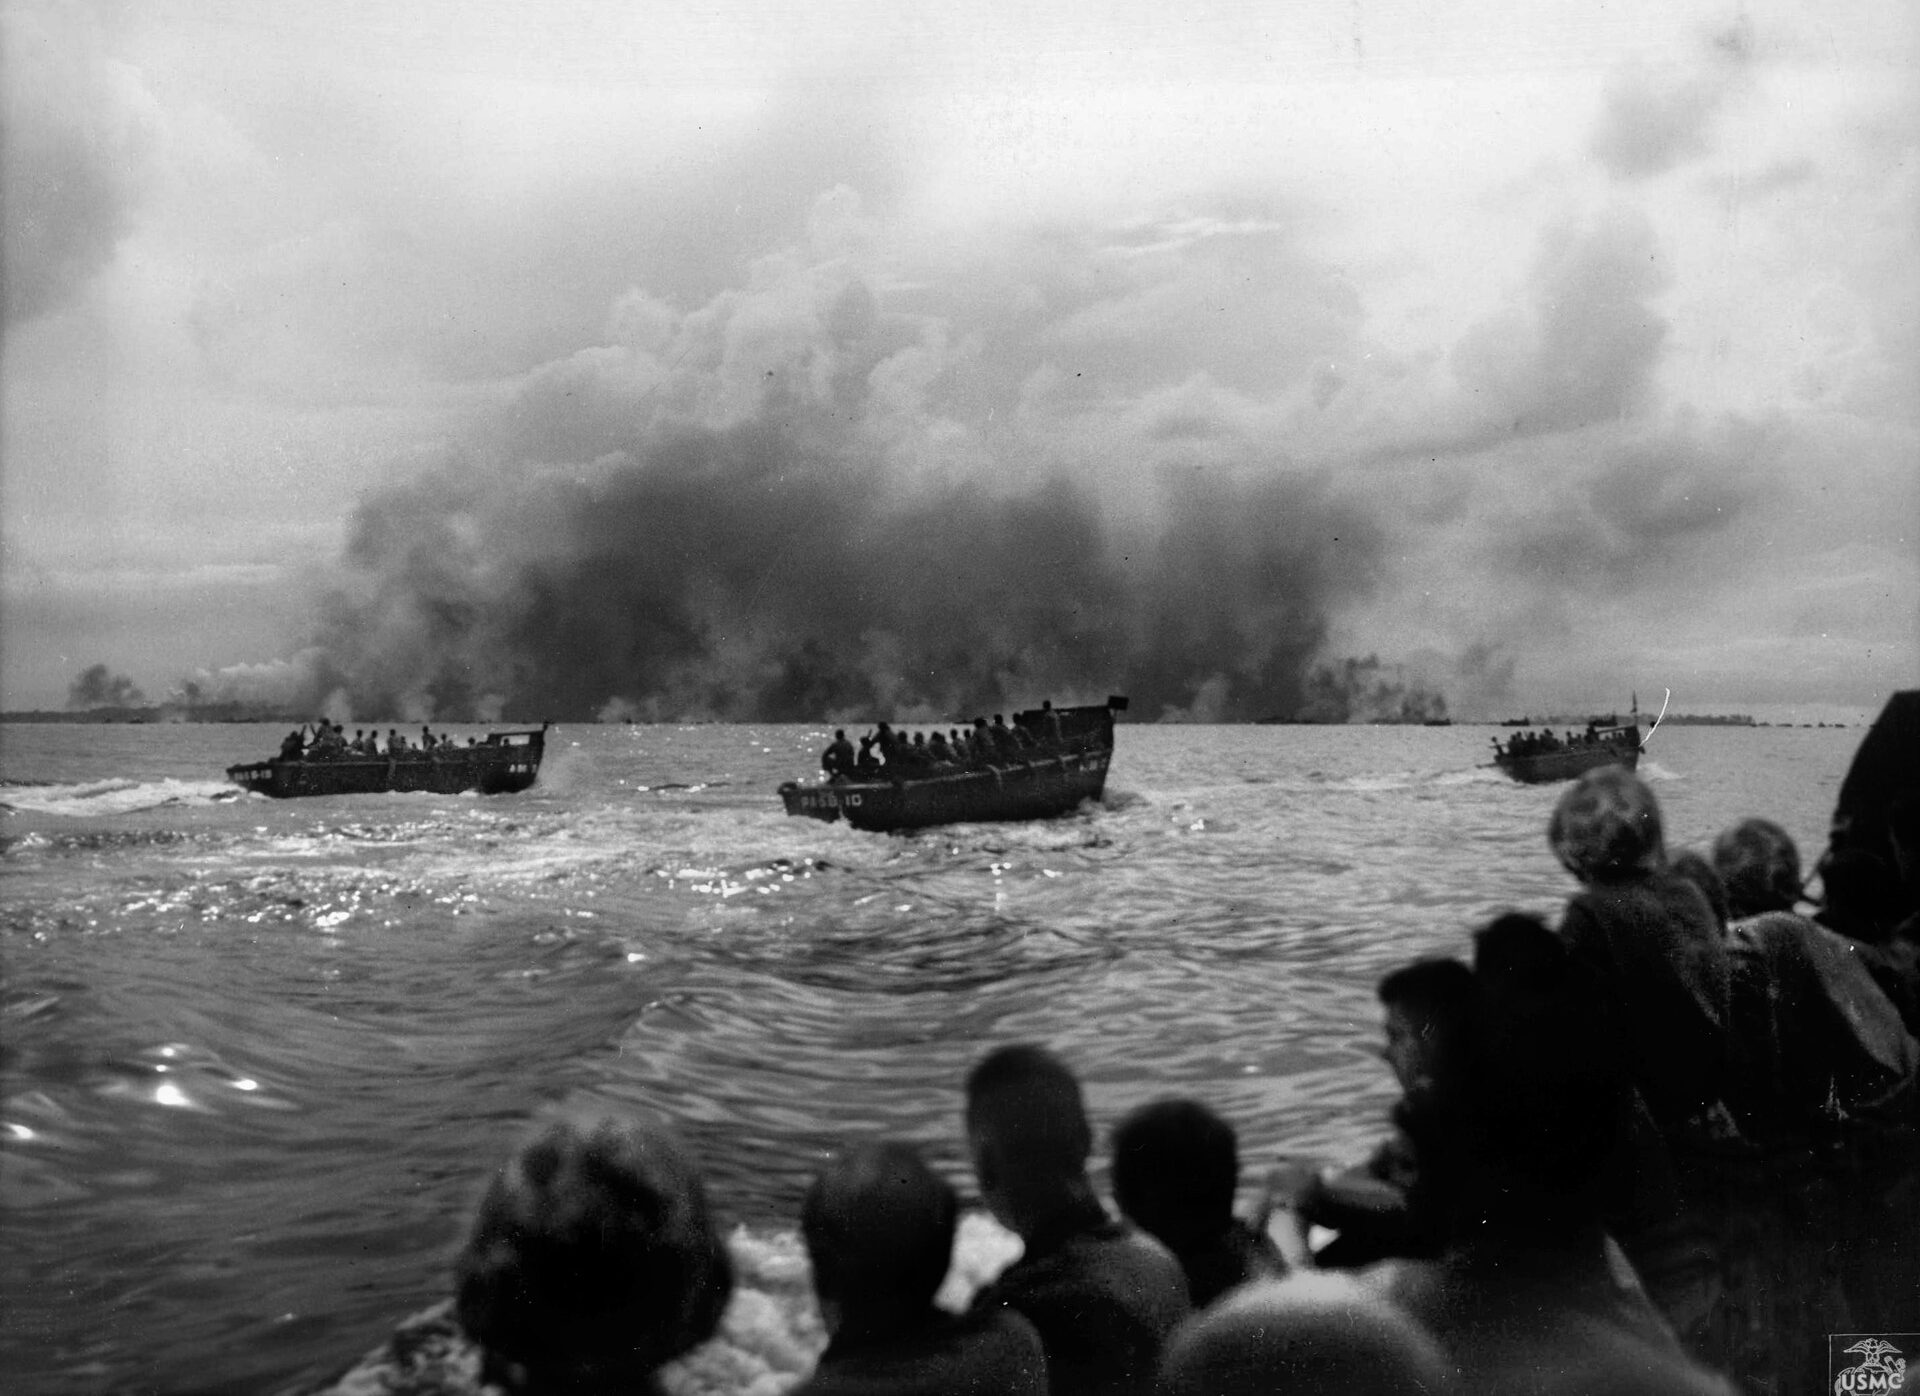 A pall of smoke from naval and air bombardment covers the small island of Peleliu as landing craft carrying the invading U.S. Marines turn for their runs into the contested beaches.